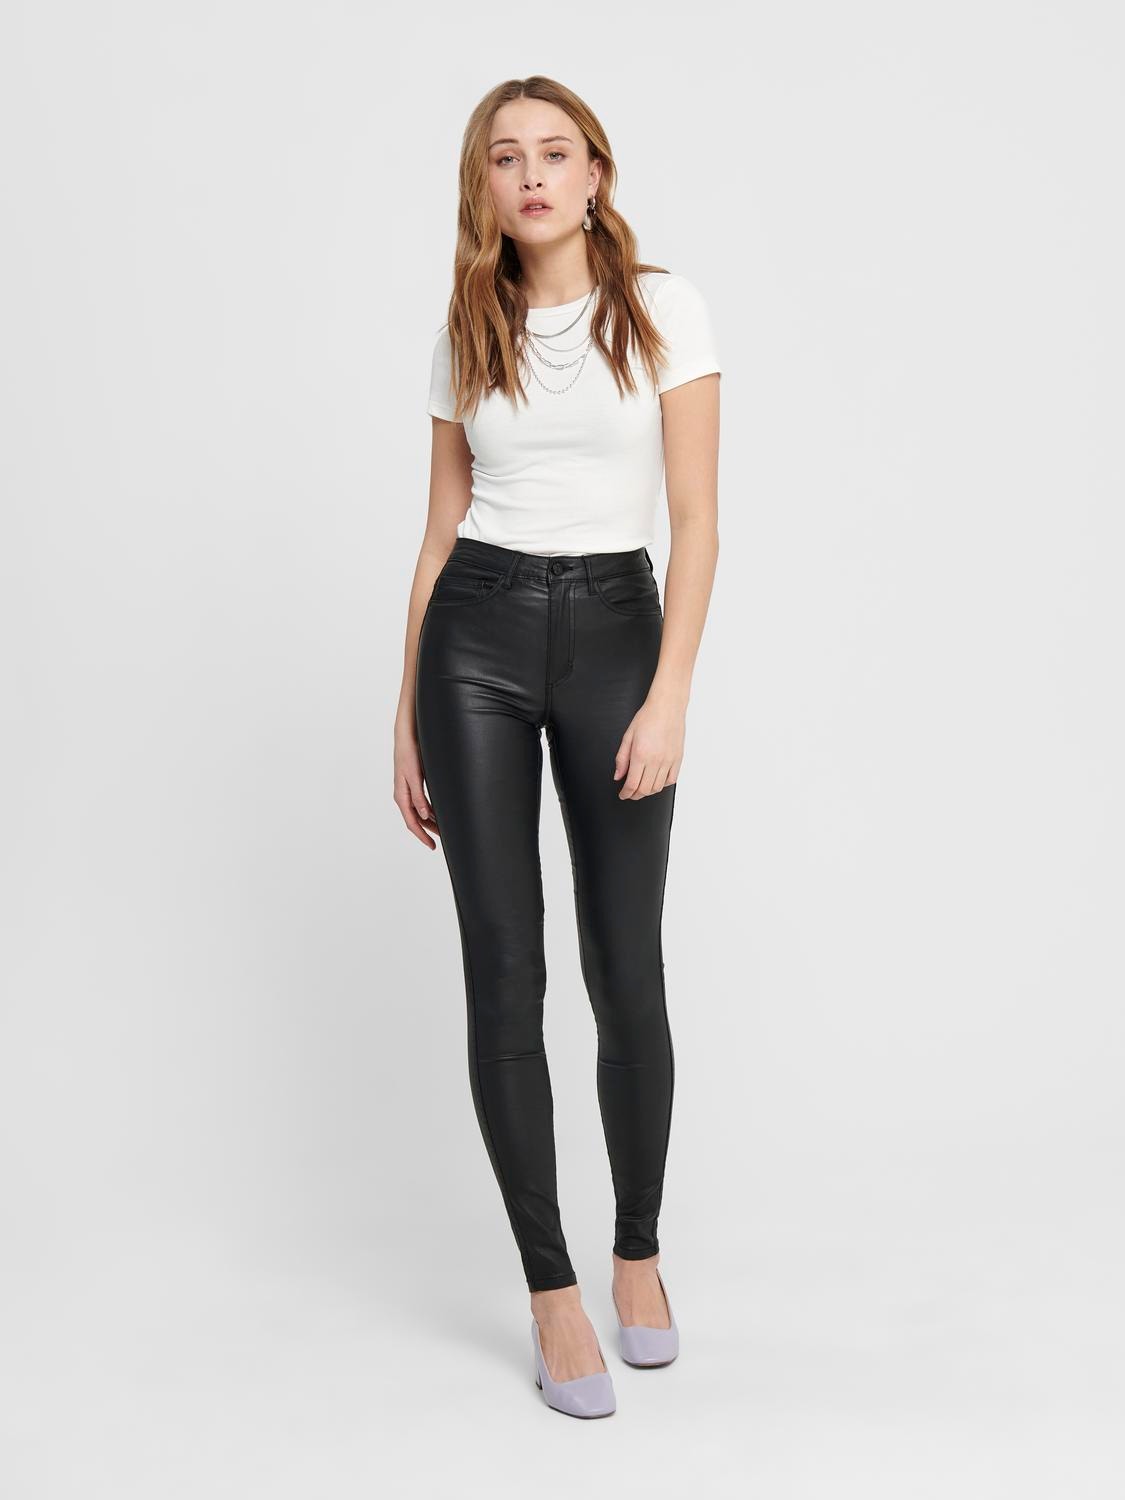 ONLY Skinny Fit High waist Trousers -Black - 15159341